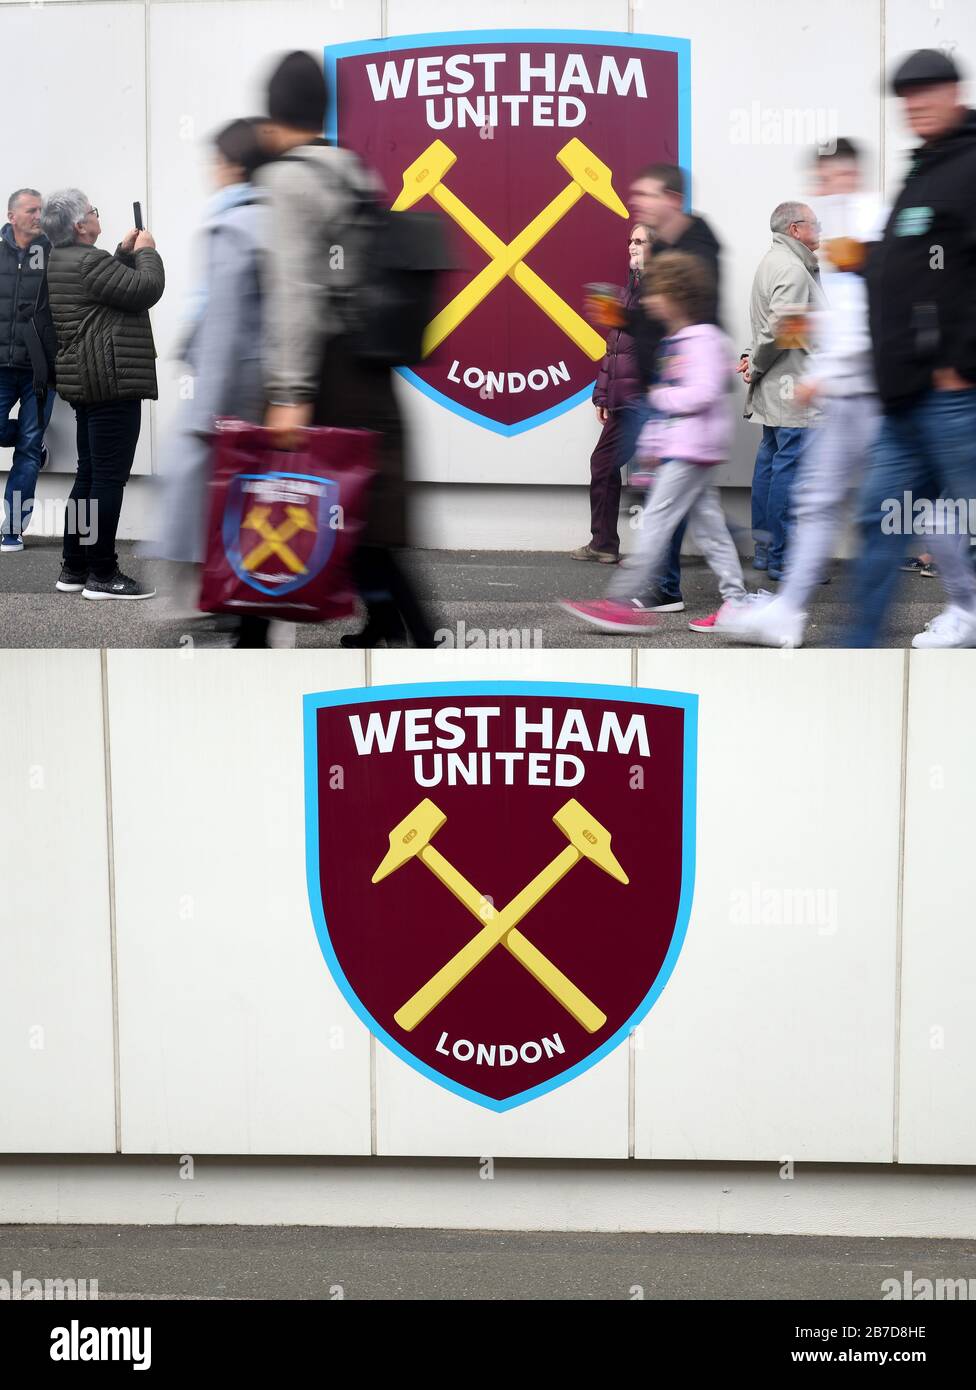 A composite photo showing West Ham United fans on their way to the stadium 04-05-2019 (top) and 15-03-2020 (bottom). Stock Photo